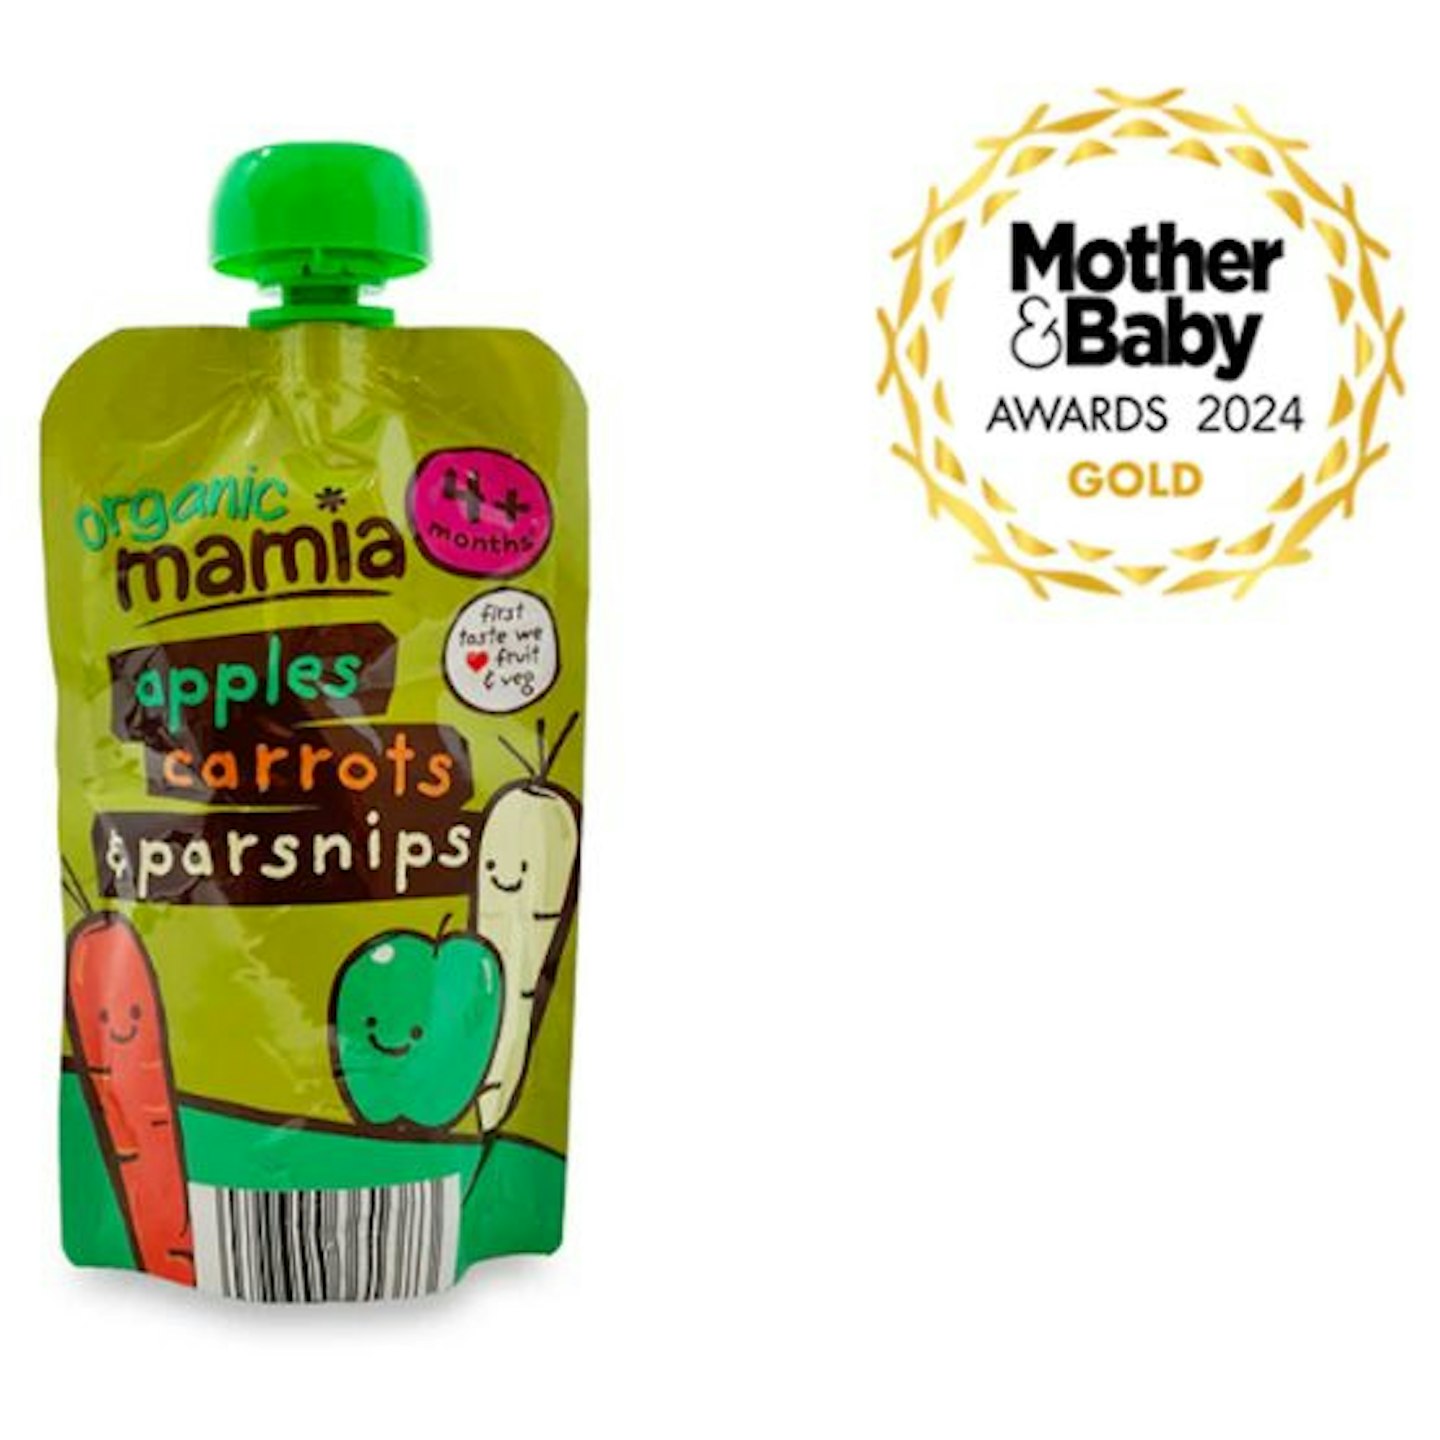 Aldi Mamia Organic Apples, Carrots and Parsnips Fruit Pouch